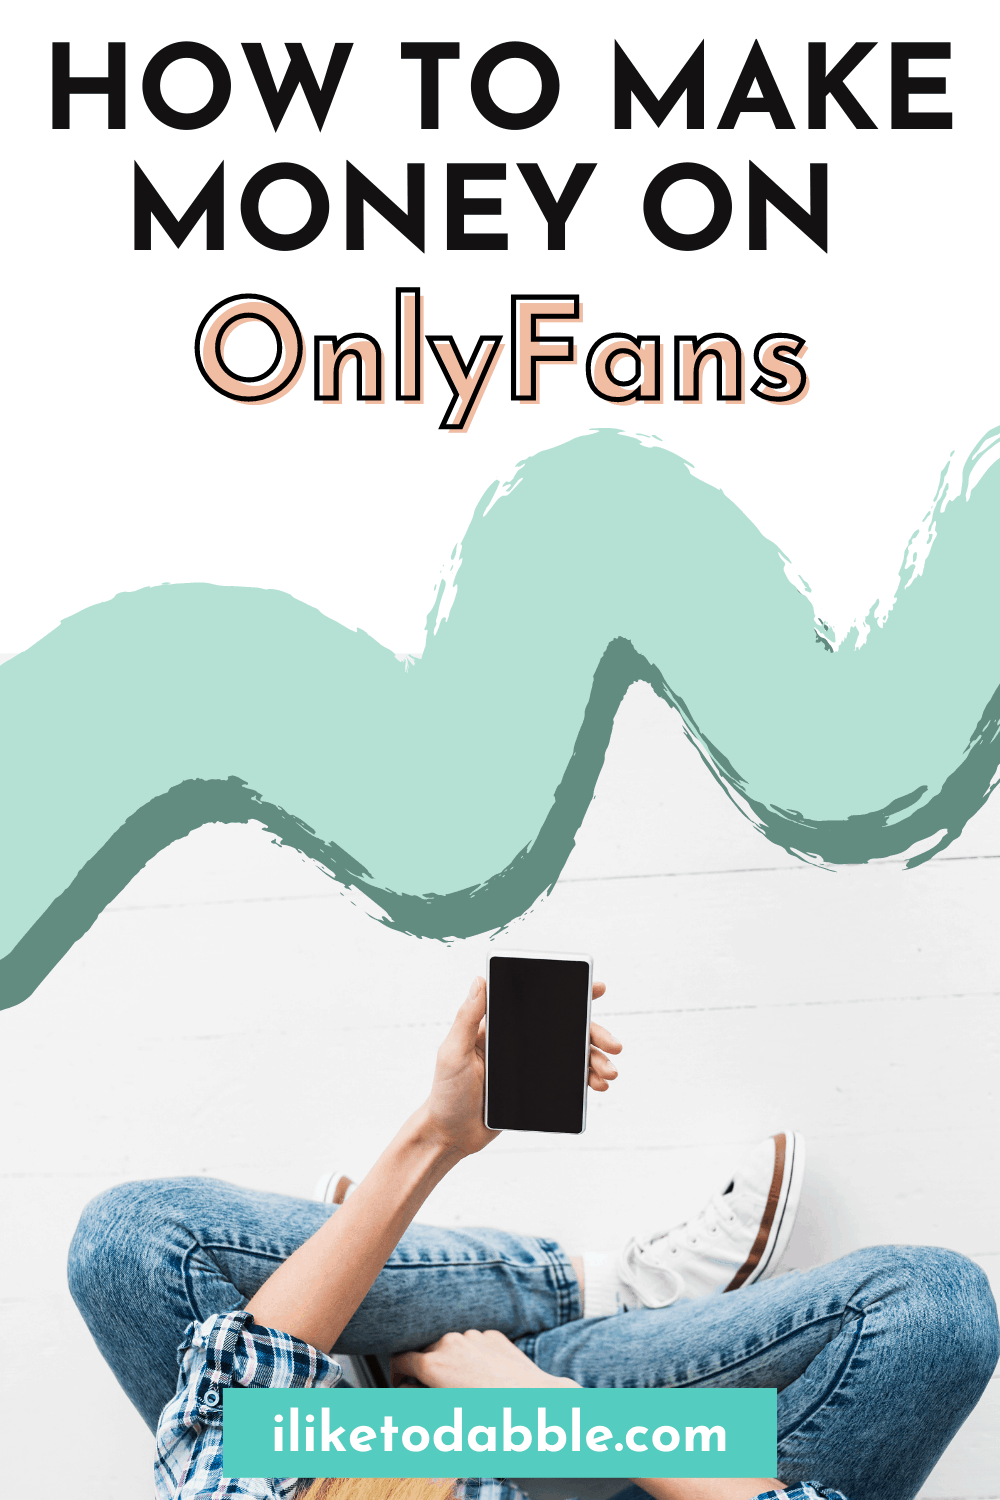 How to make money on only fans page